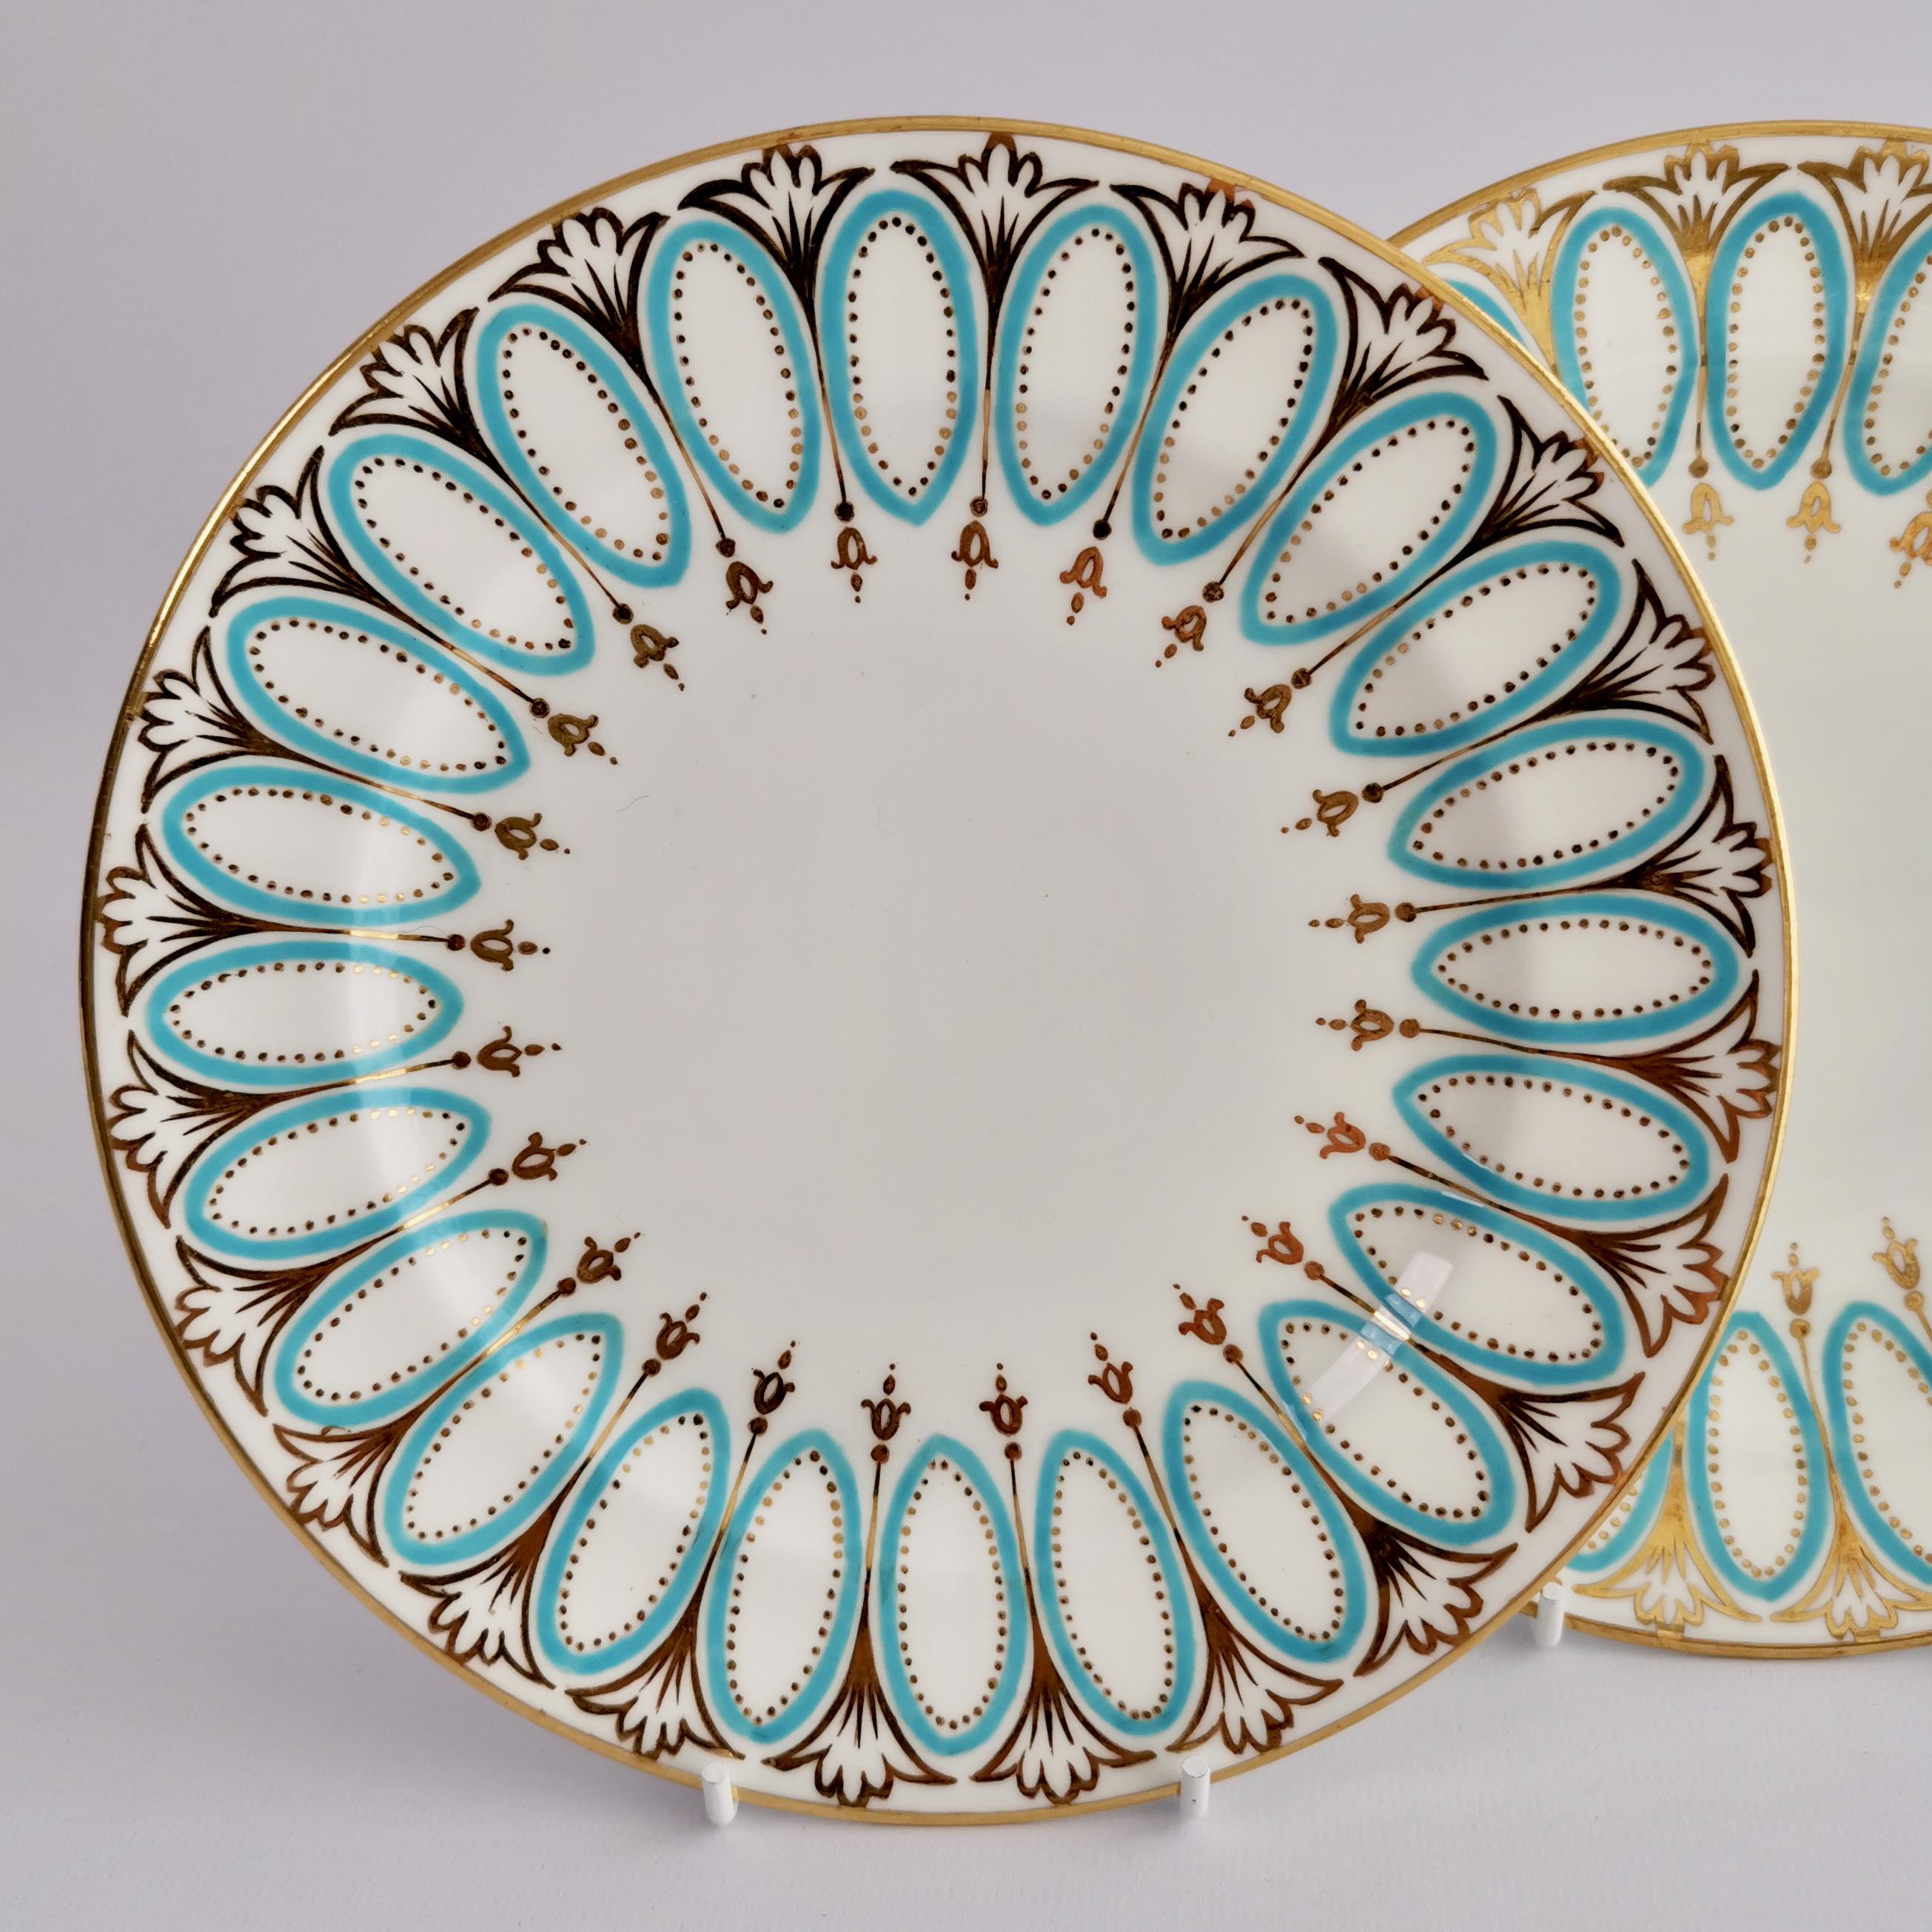 English Pair of Hammersley Tea Plates, White, Gilt and Turquoise, Edwardian Early 20th C